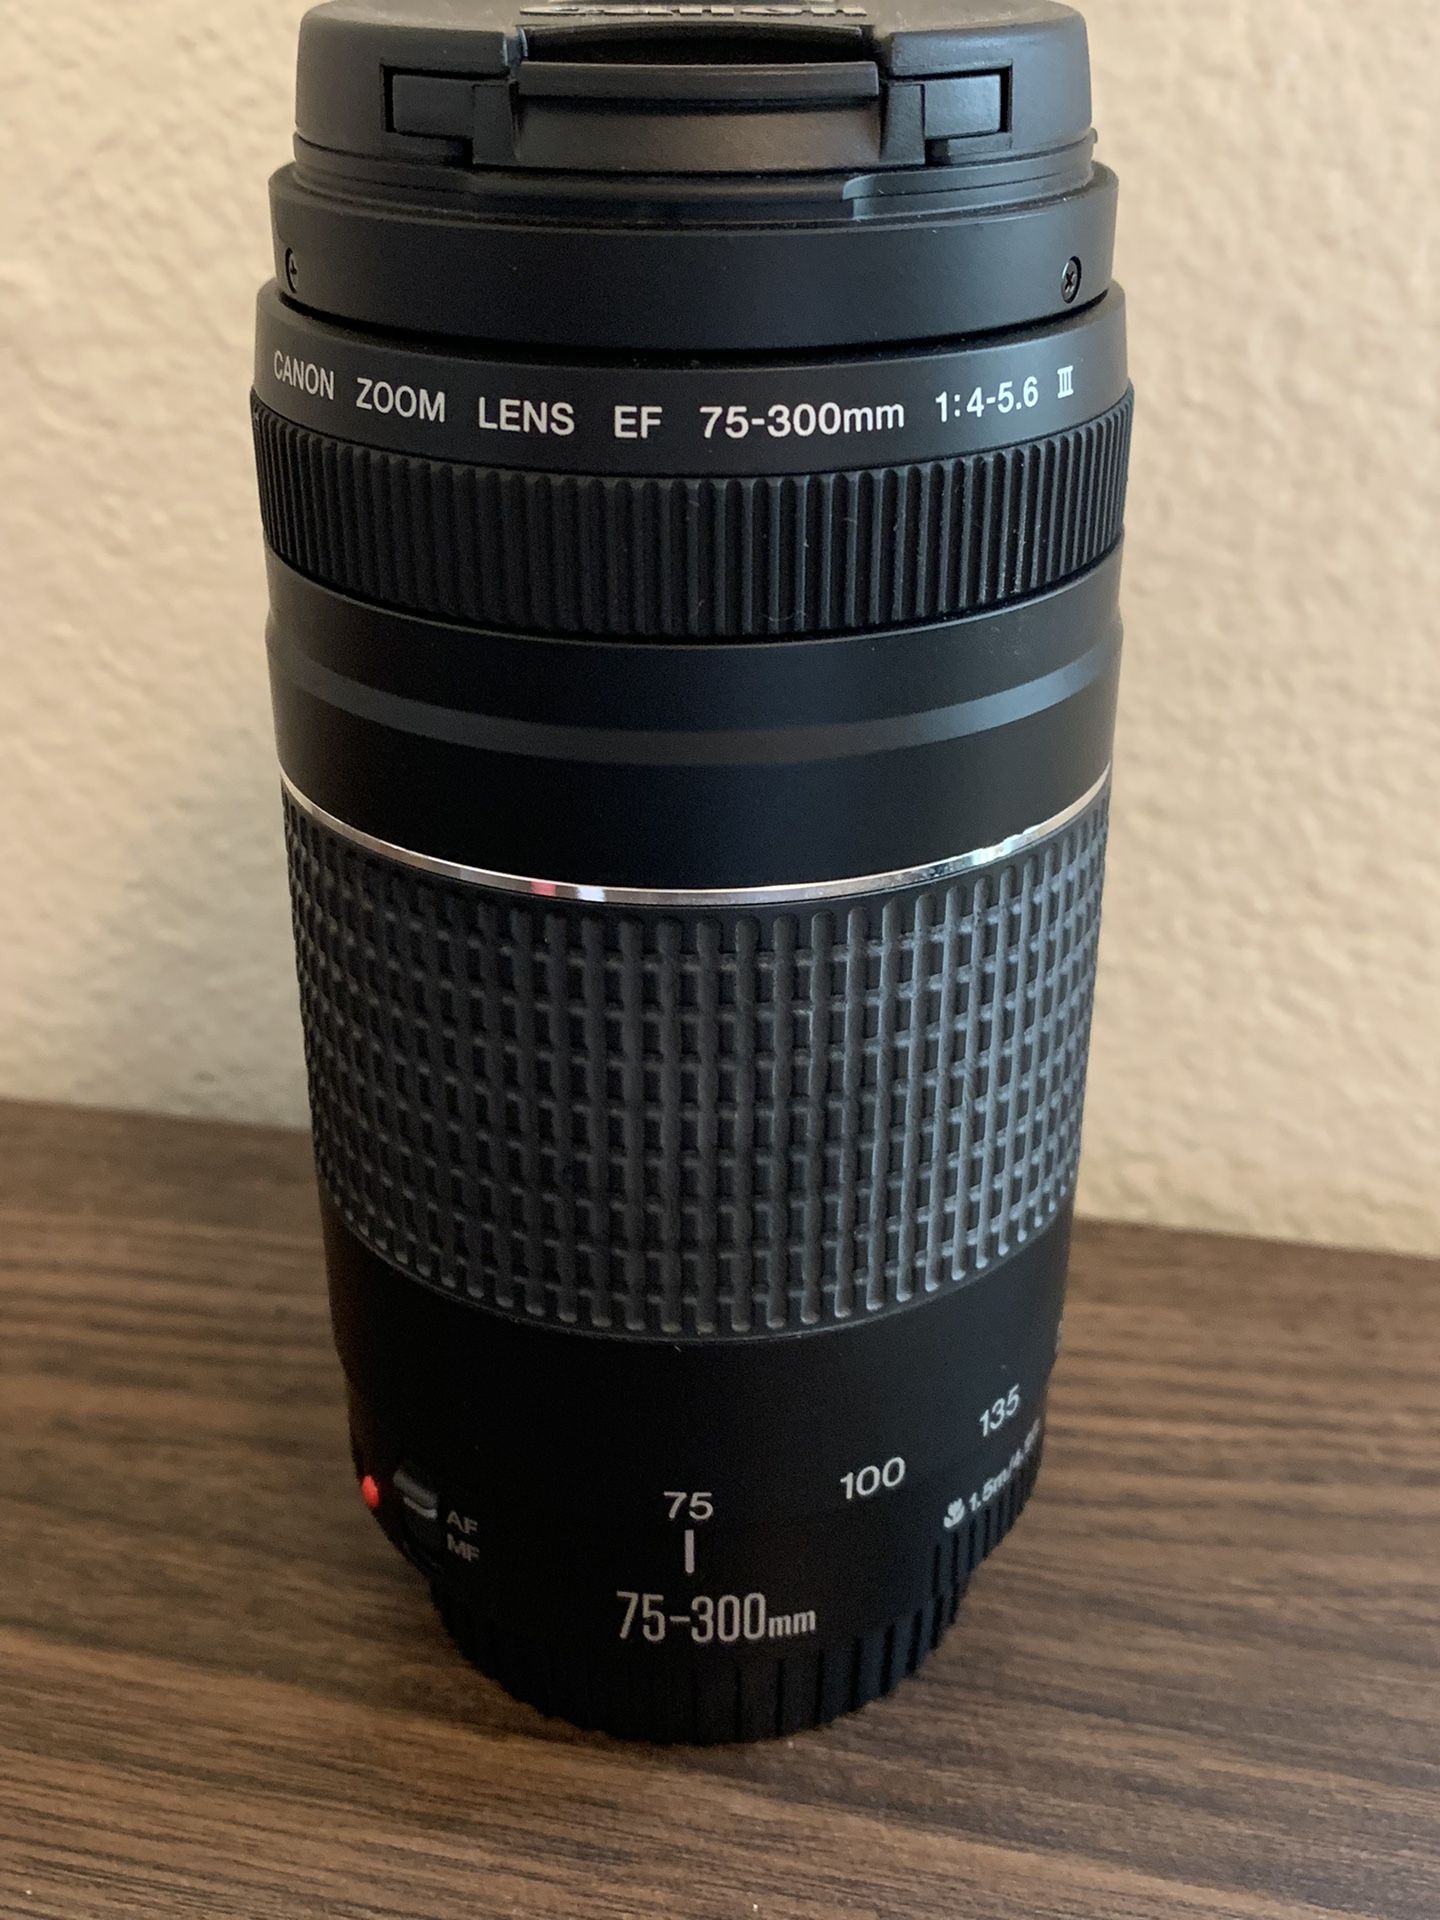 Zoom Lens CANON 75-300mm 